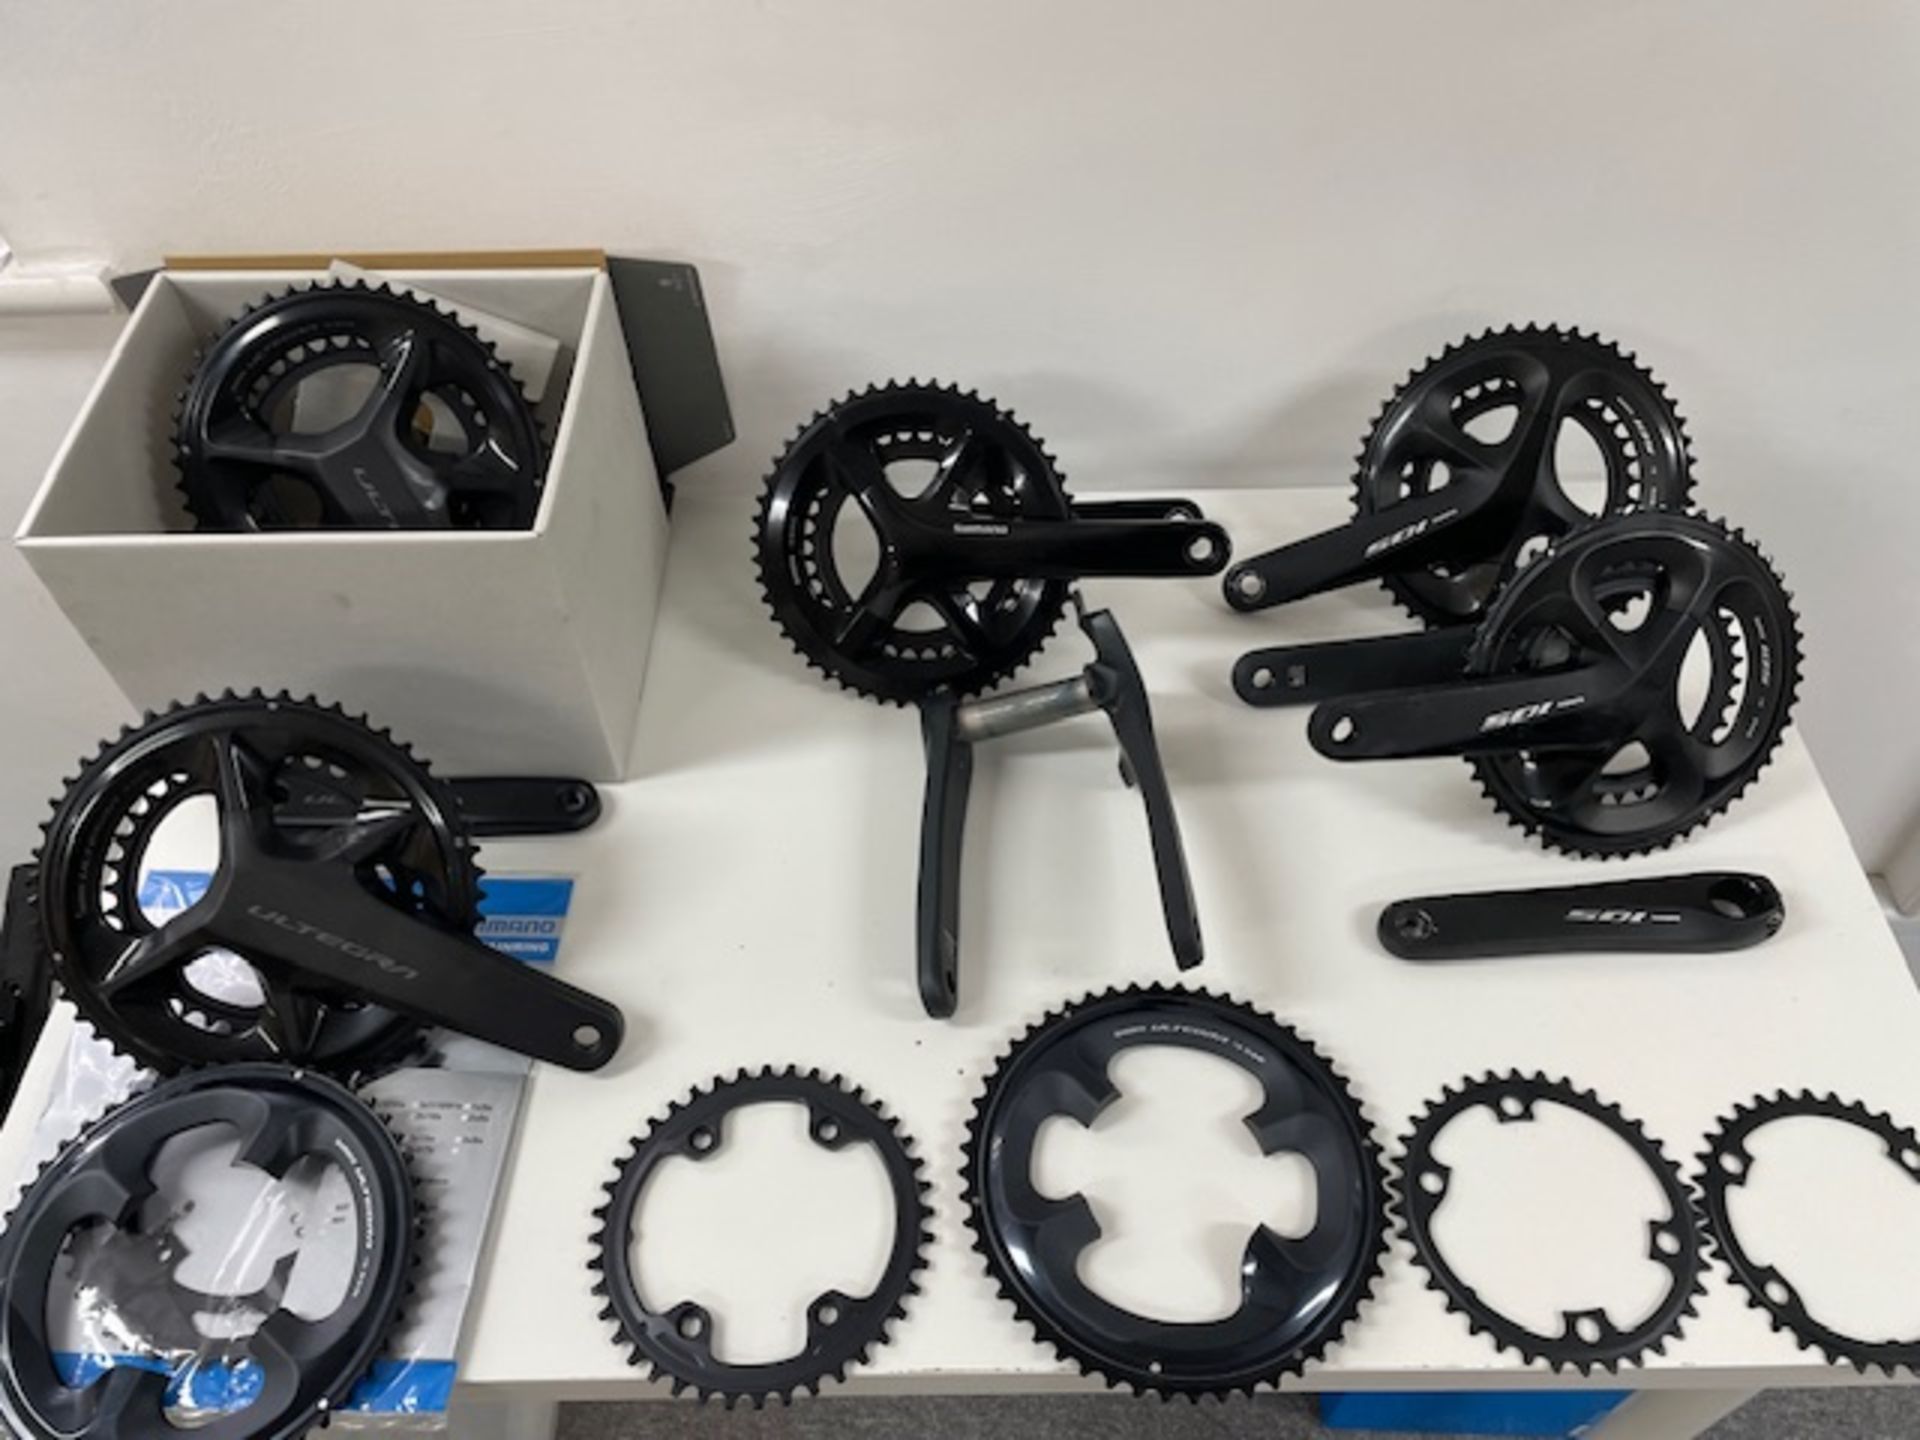 Shimano Ultegra 105 Chain Sets (Location: Newport Pagnell. Please Refer to General Notes)